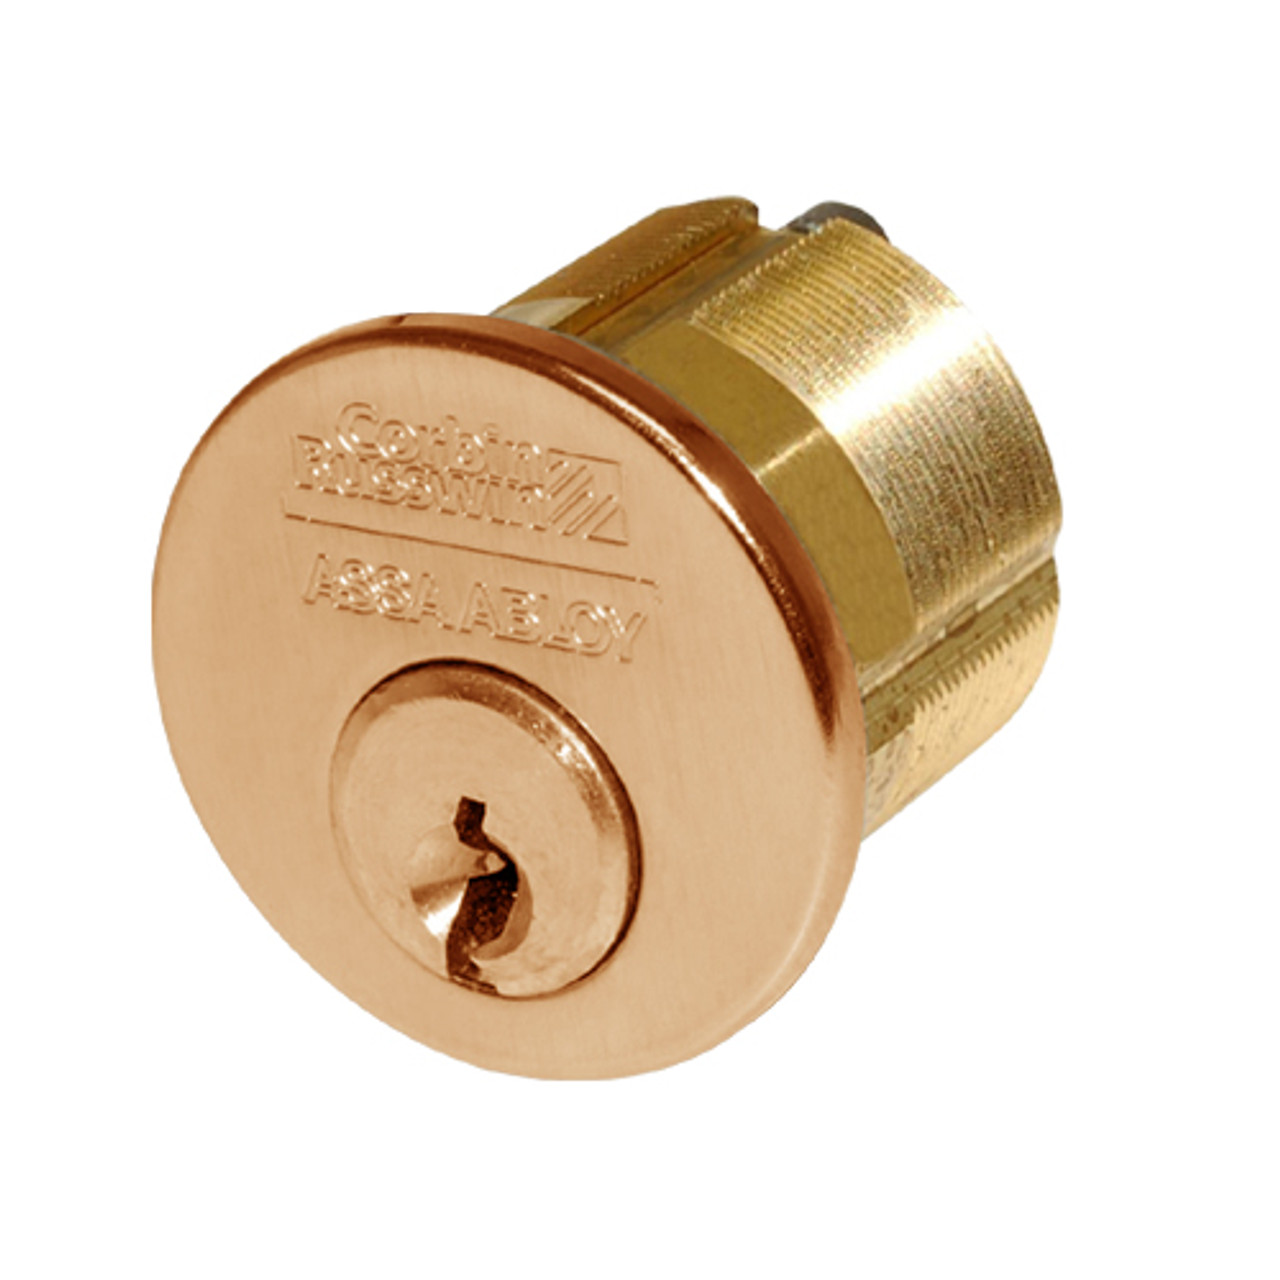 CR1000-200-A06-6-27A1-612 Corbin Conventional Mortise Cylinder for Mortise Lock and DL3000 Deadlocks with Schlage L9000 Cam in Satin Bronze Finish